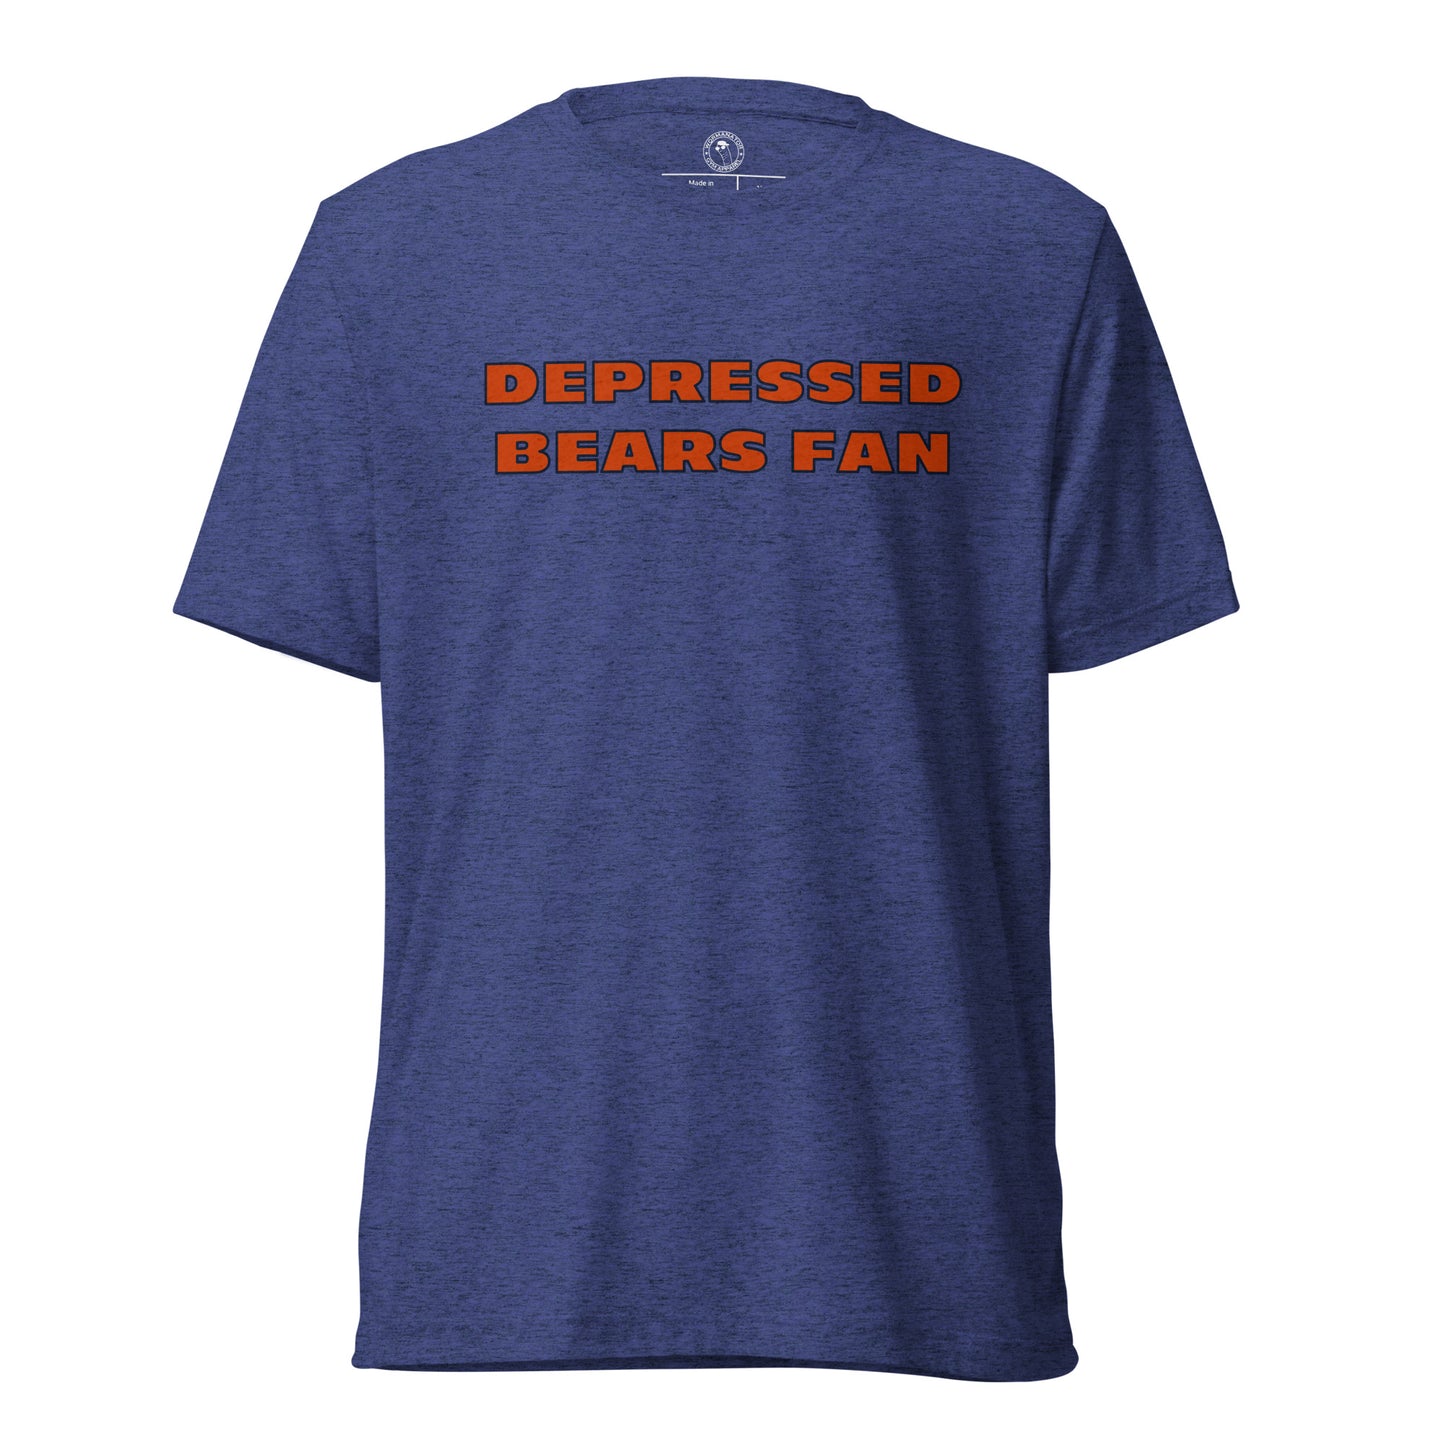 Depressed Chicago Bears Fan Shirt in Navy Triblend